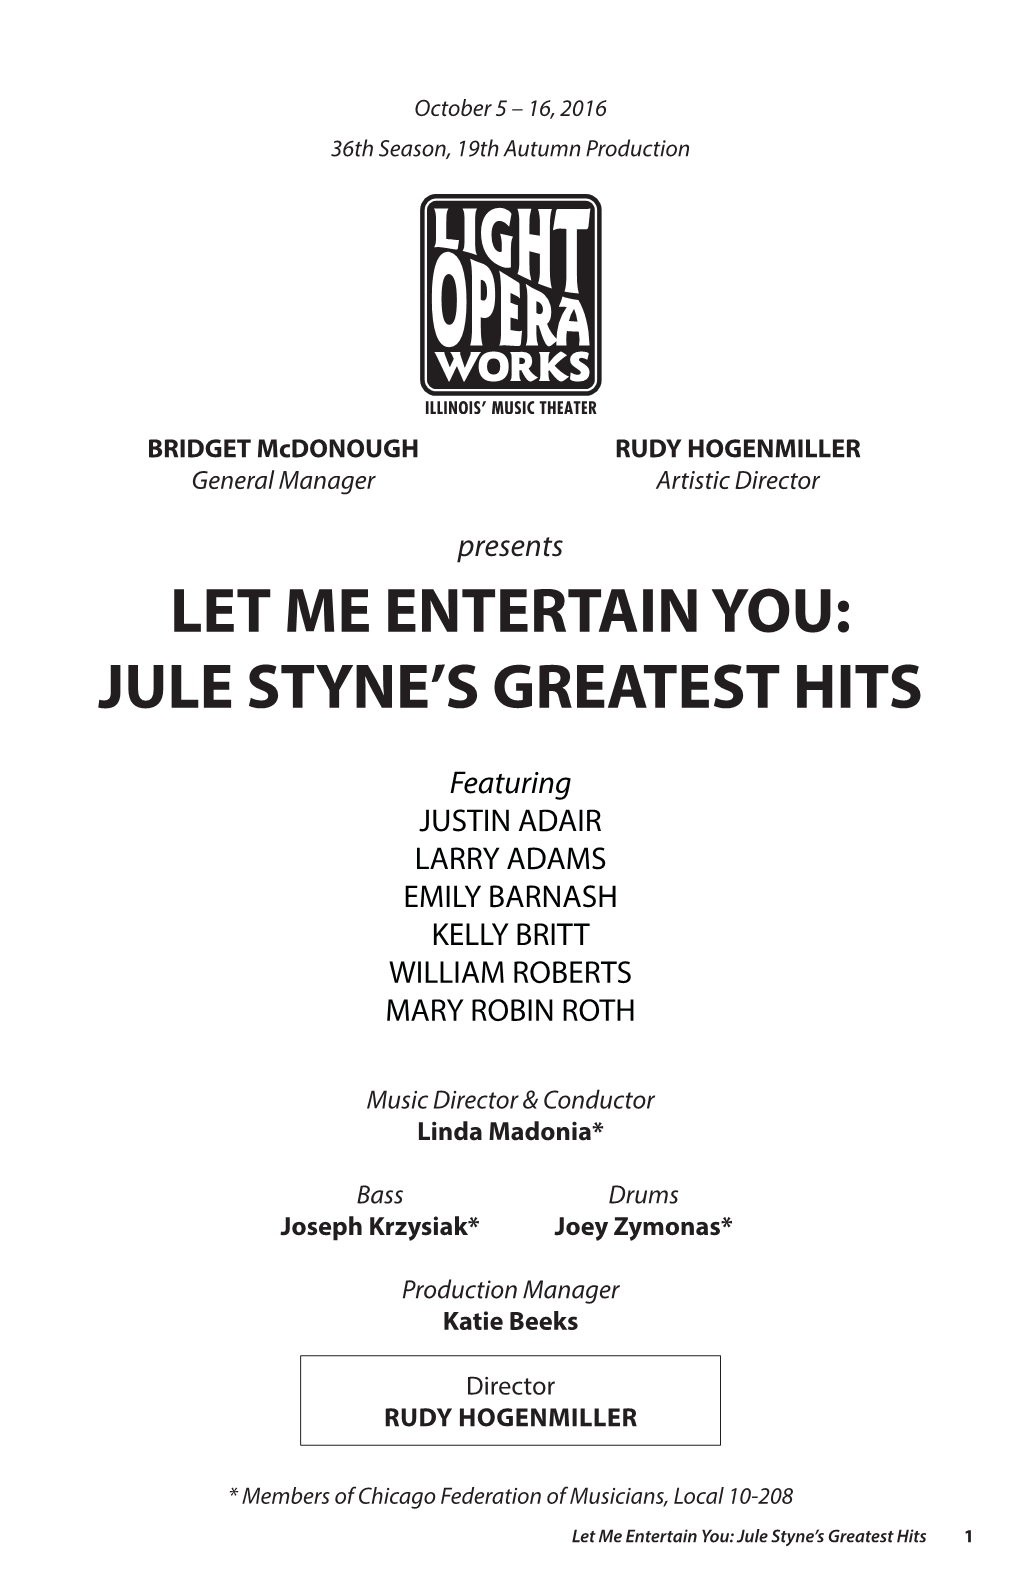 Let Me Entertain You: Jule Styne's Greatest Hits